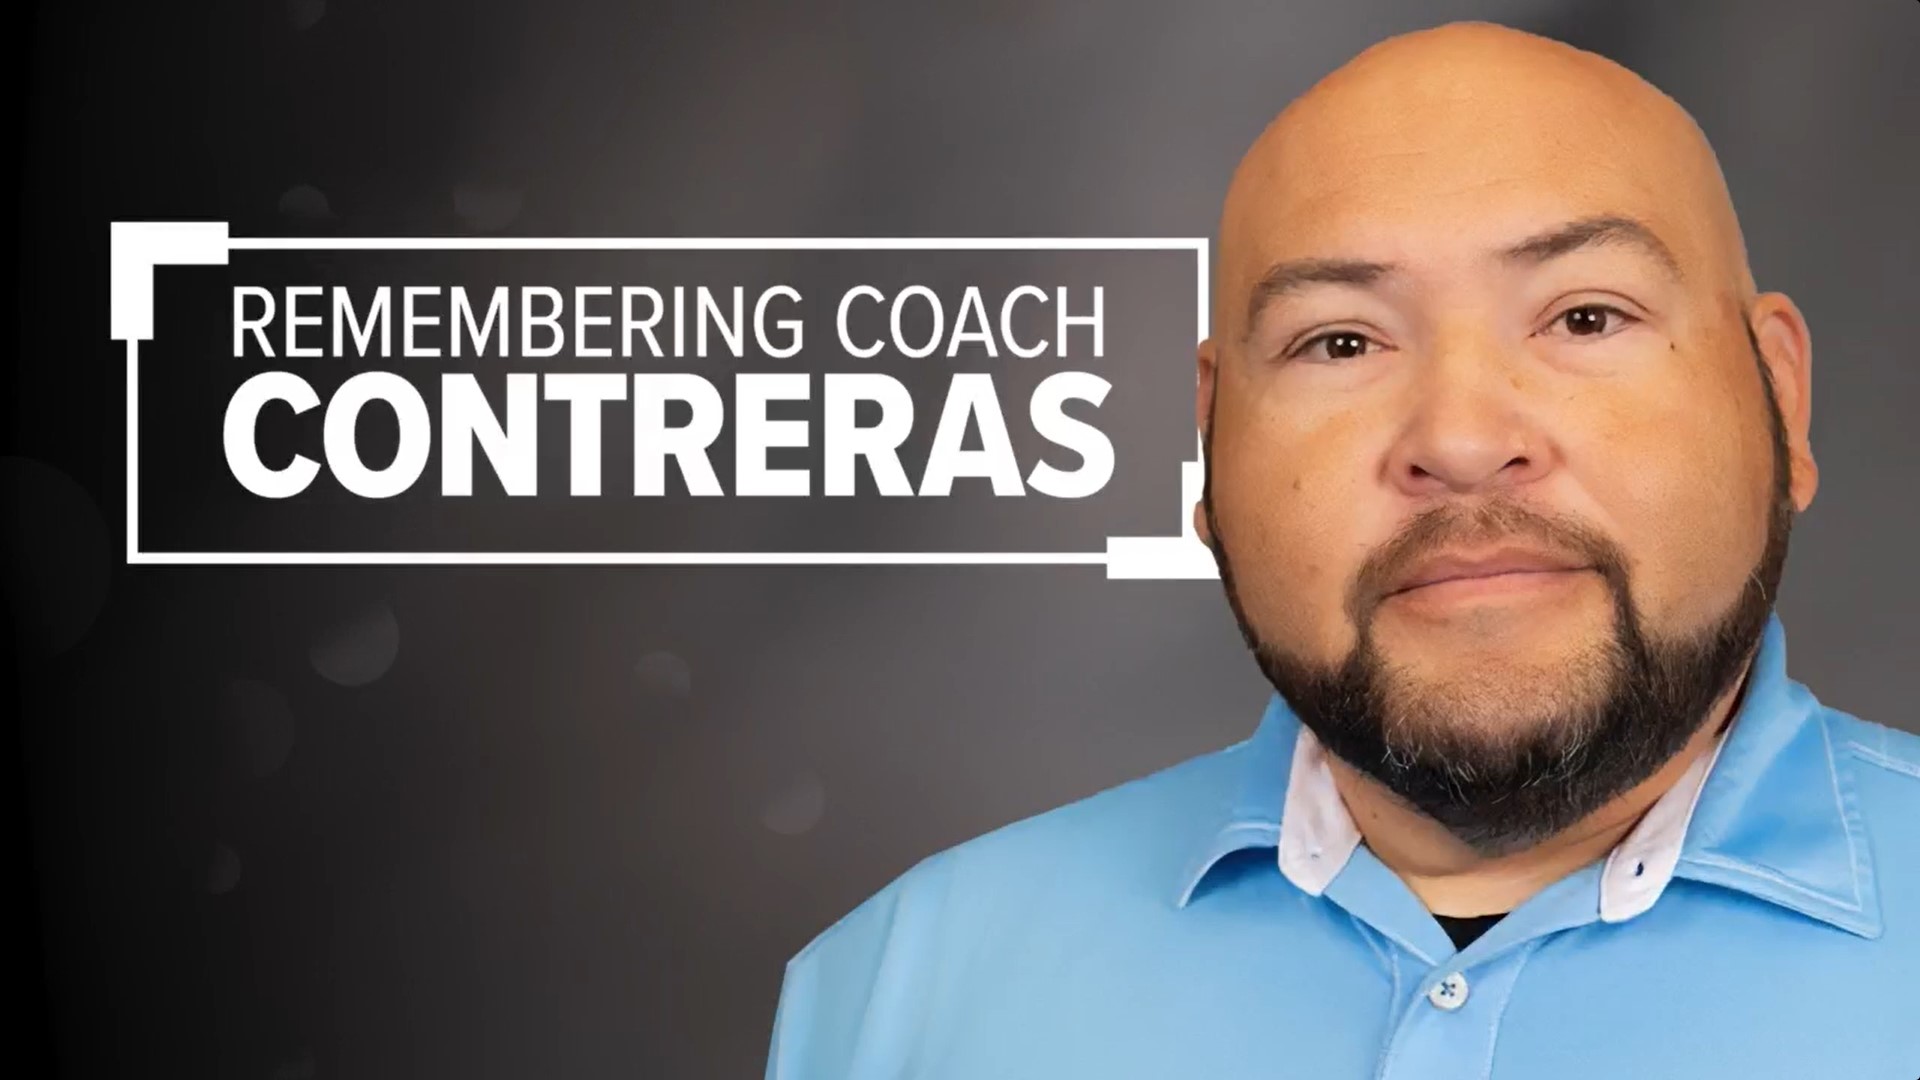 Kingsville ISD issued a statement Saturday morning, saying in part, "Our condolences pour out to the family of our beloved Coach, Marco Contreras."